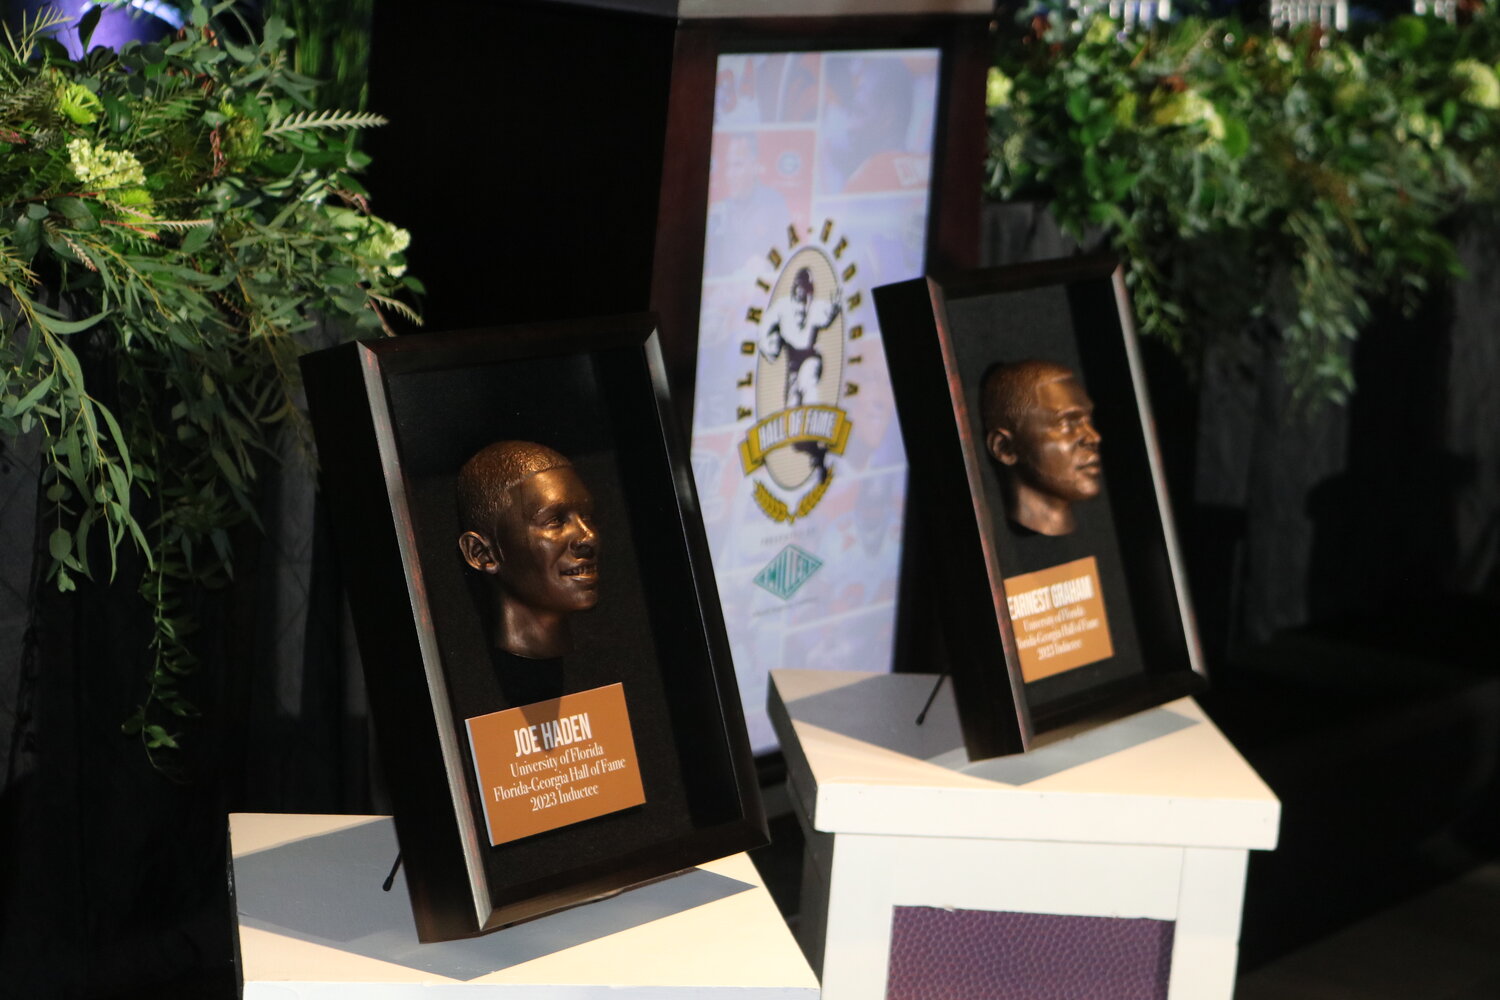 Each inductee received a plaque to commemorate their induction into the Hall of Fame.